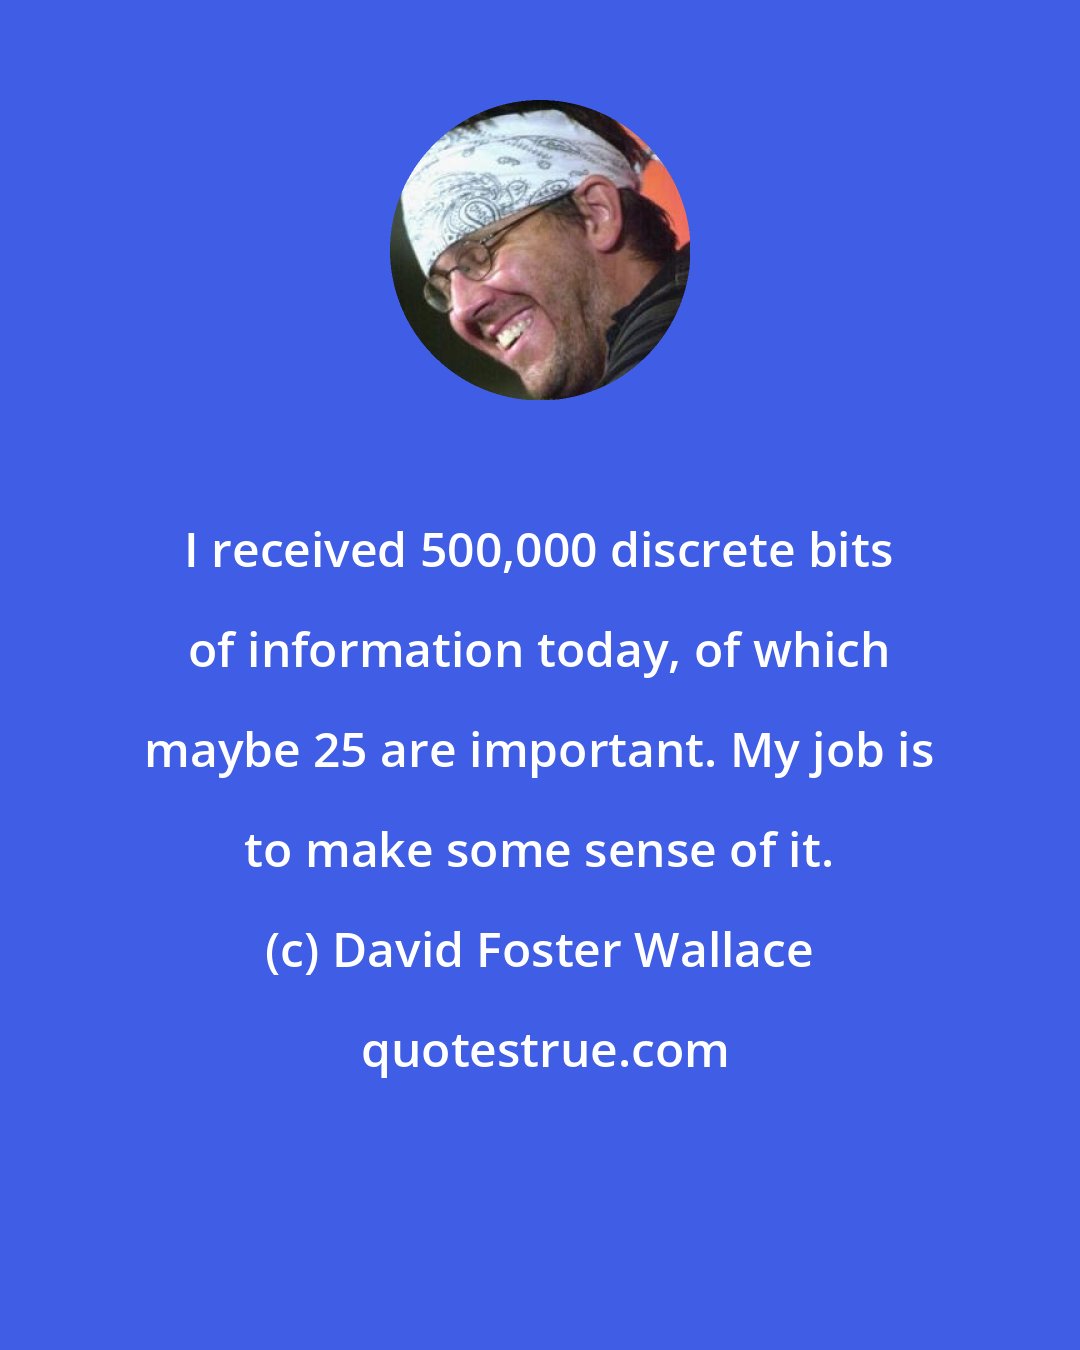 David Foster Wallace: I received 500,000 discrete bits of information today, of which maybe 25 are important. My job is to make some sense of it.